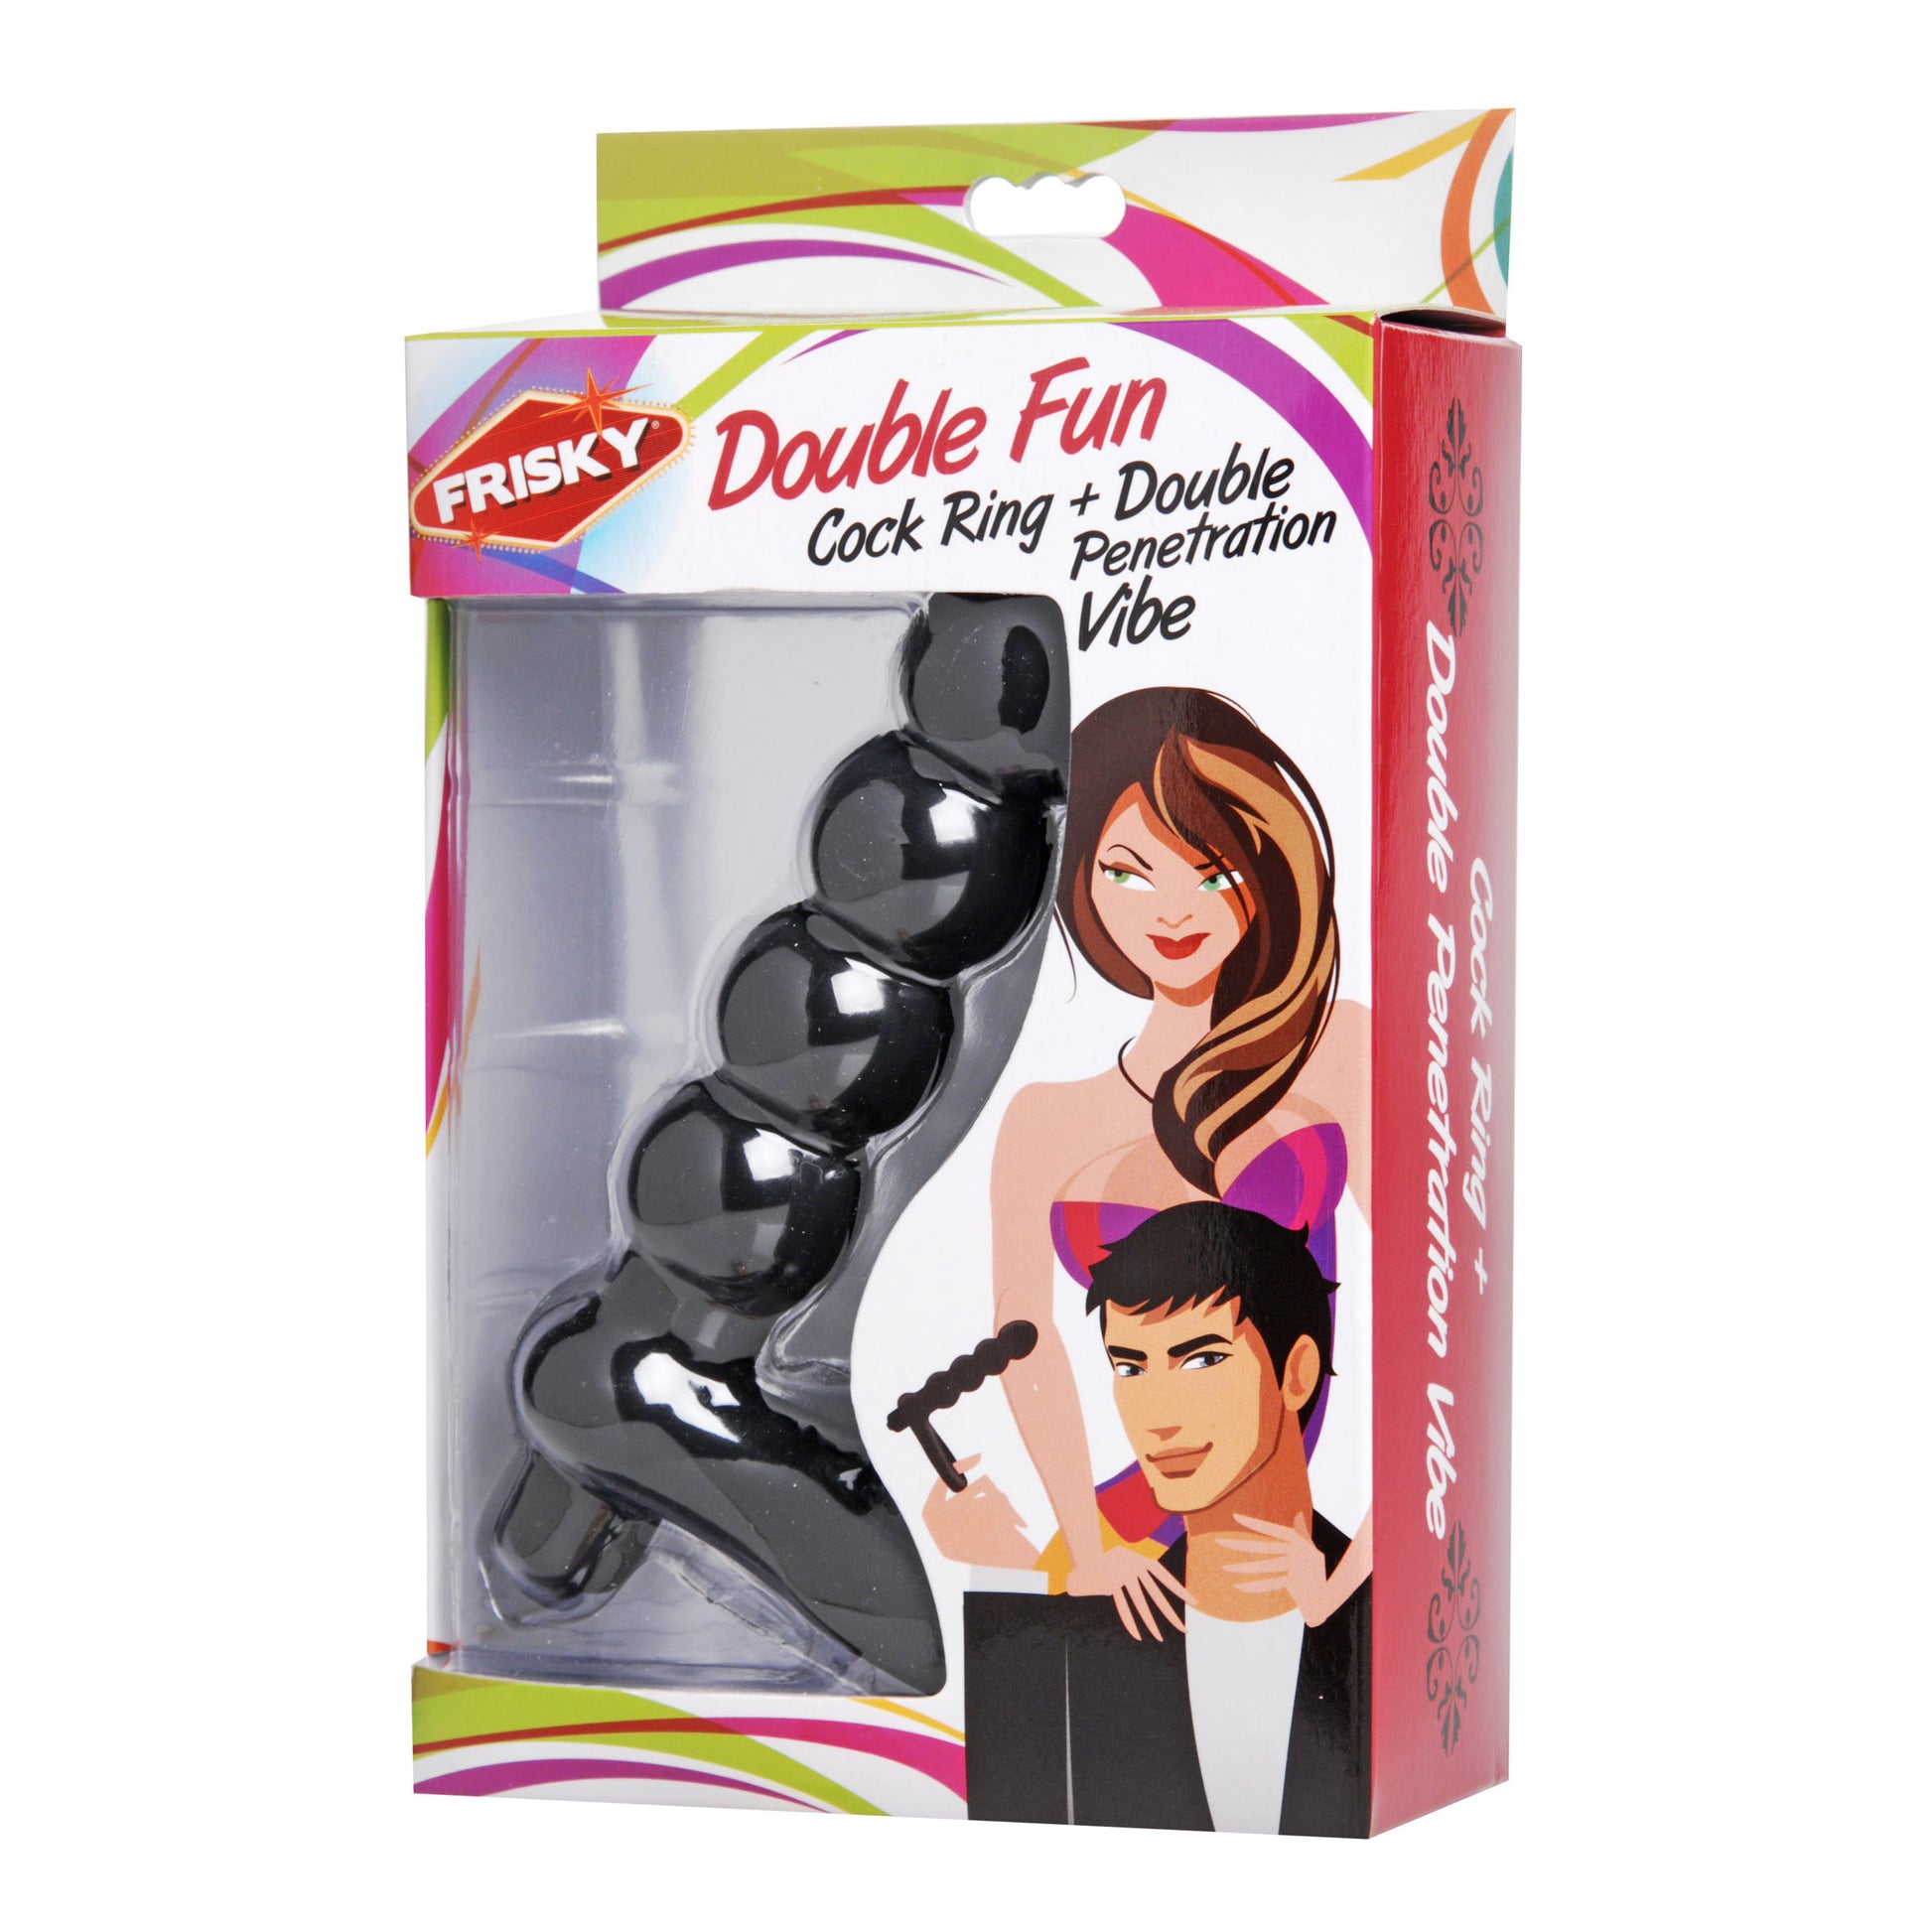 Double Fun Cock Ring with Double Penetration Vibe - UABDSM